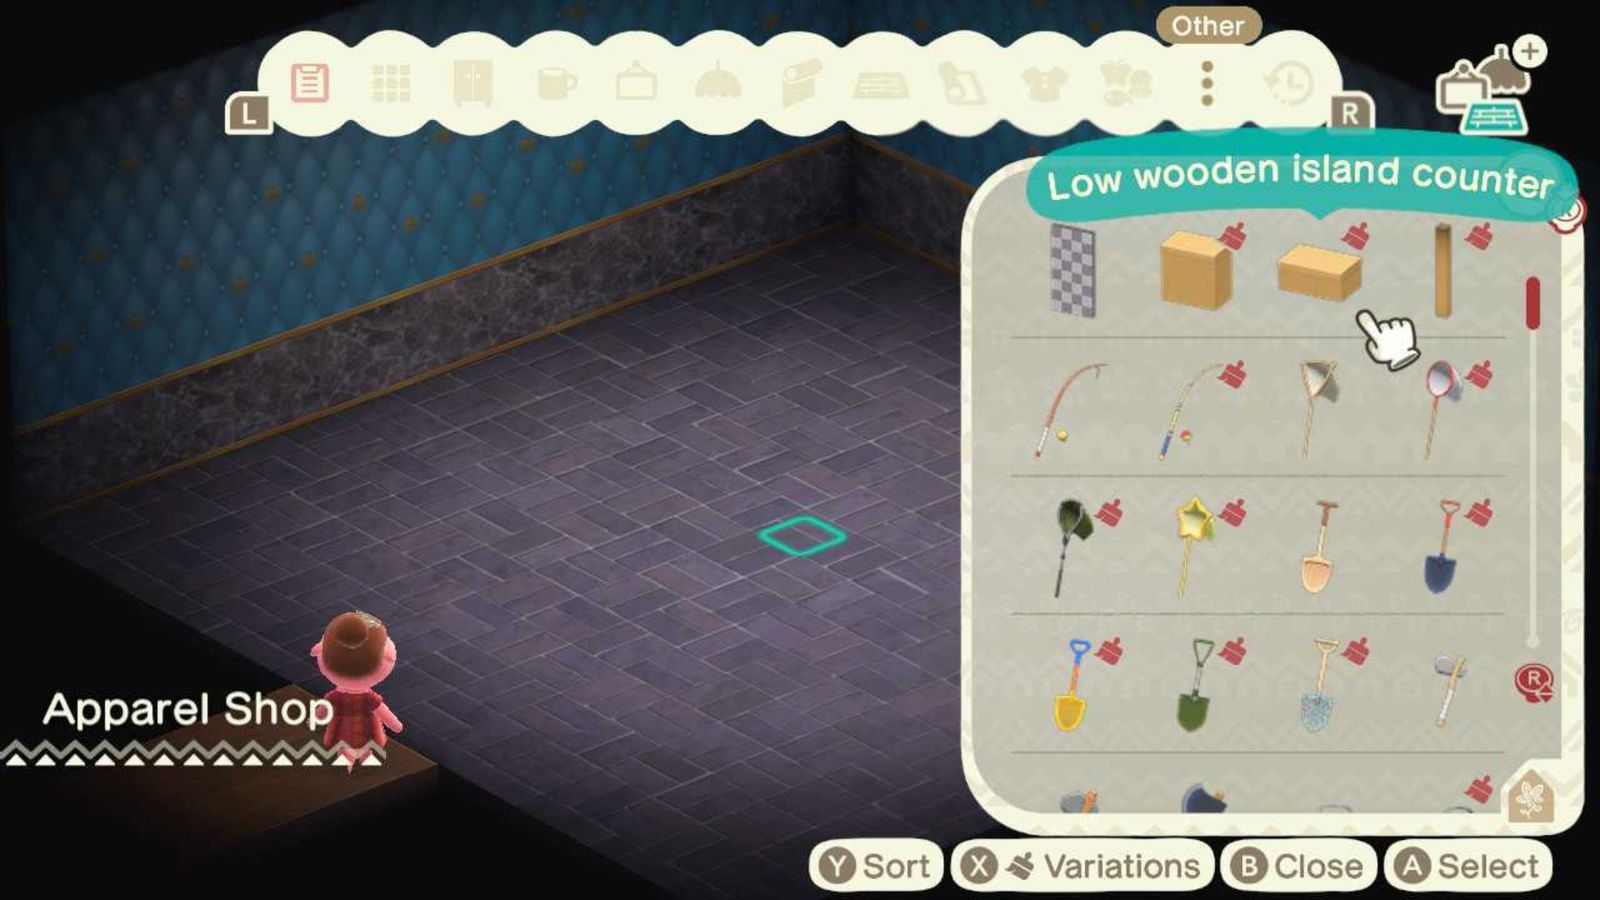 Animal Crossing New Horizons Happy Home Paradise. The furniture menu is on the others option. A low wooden island counter has been selected from the variety of item options. 